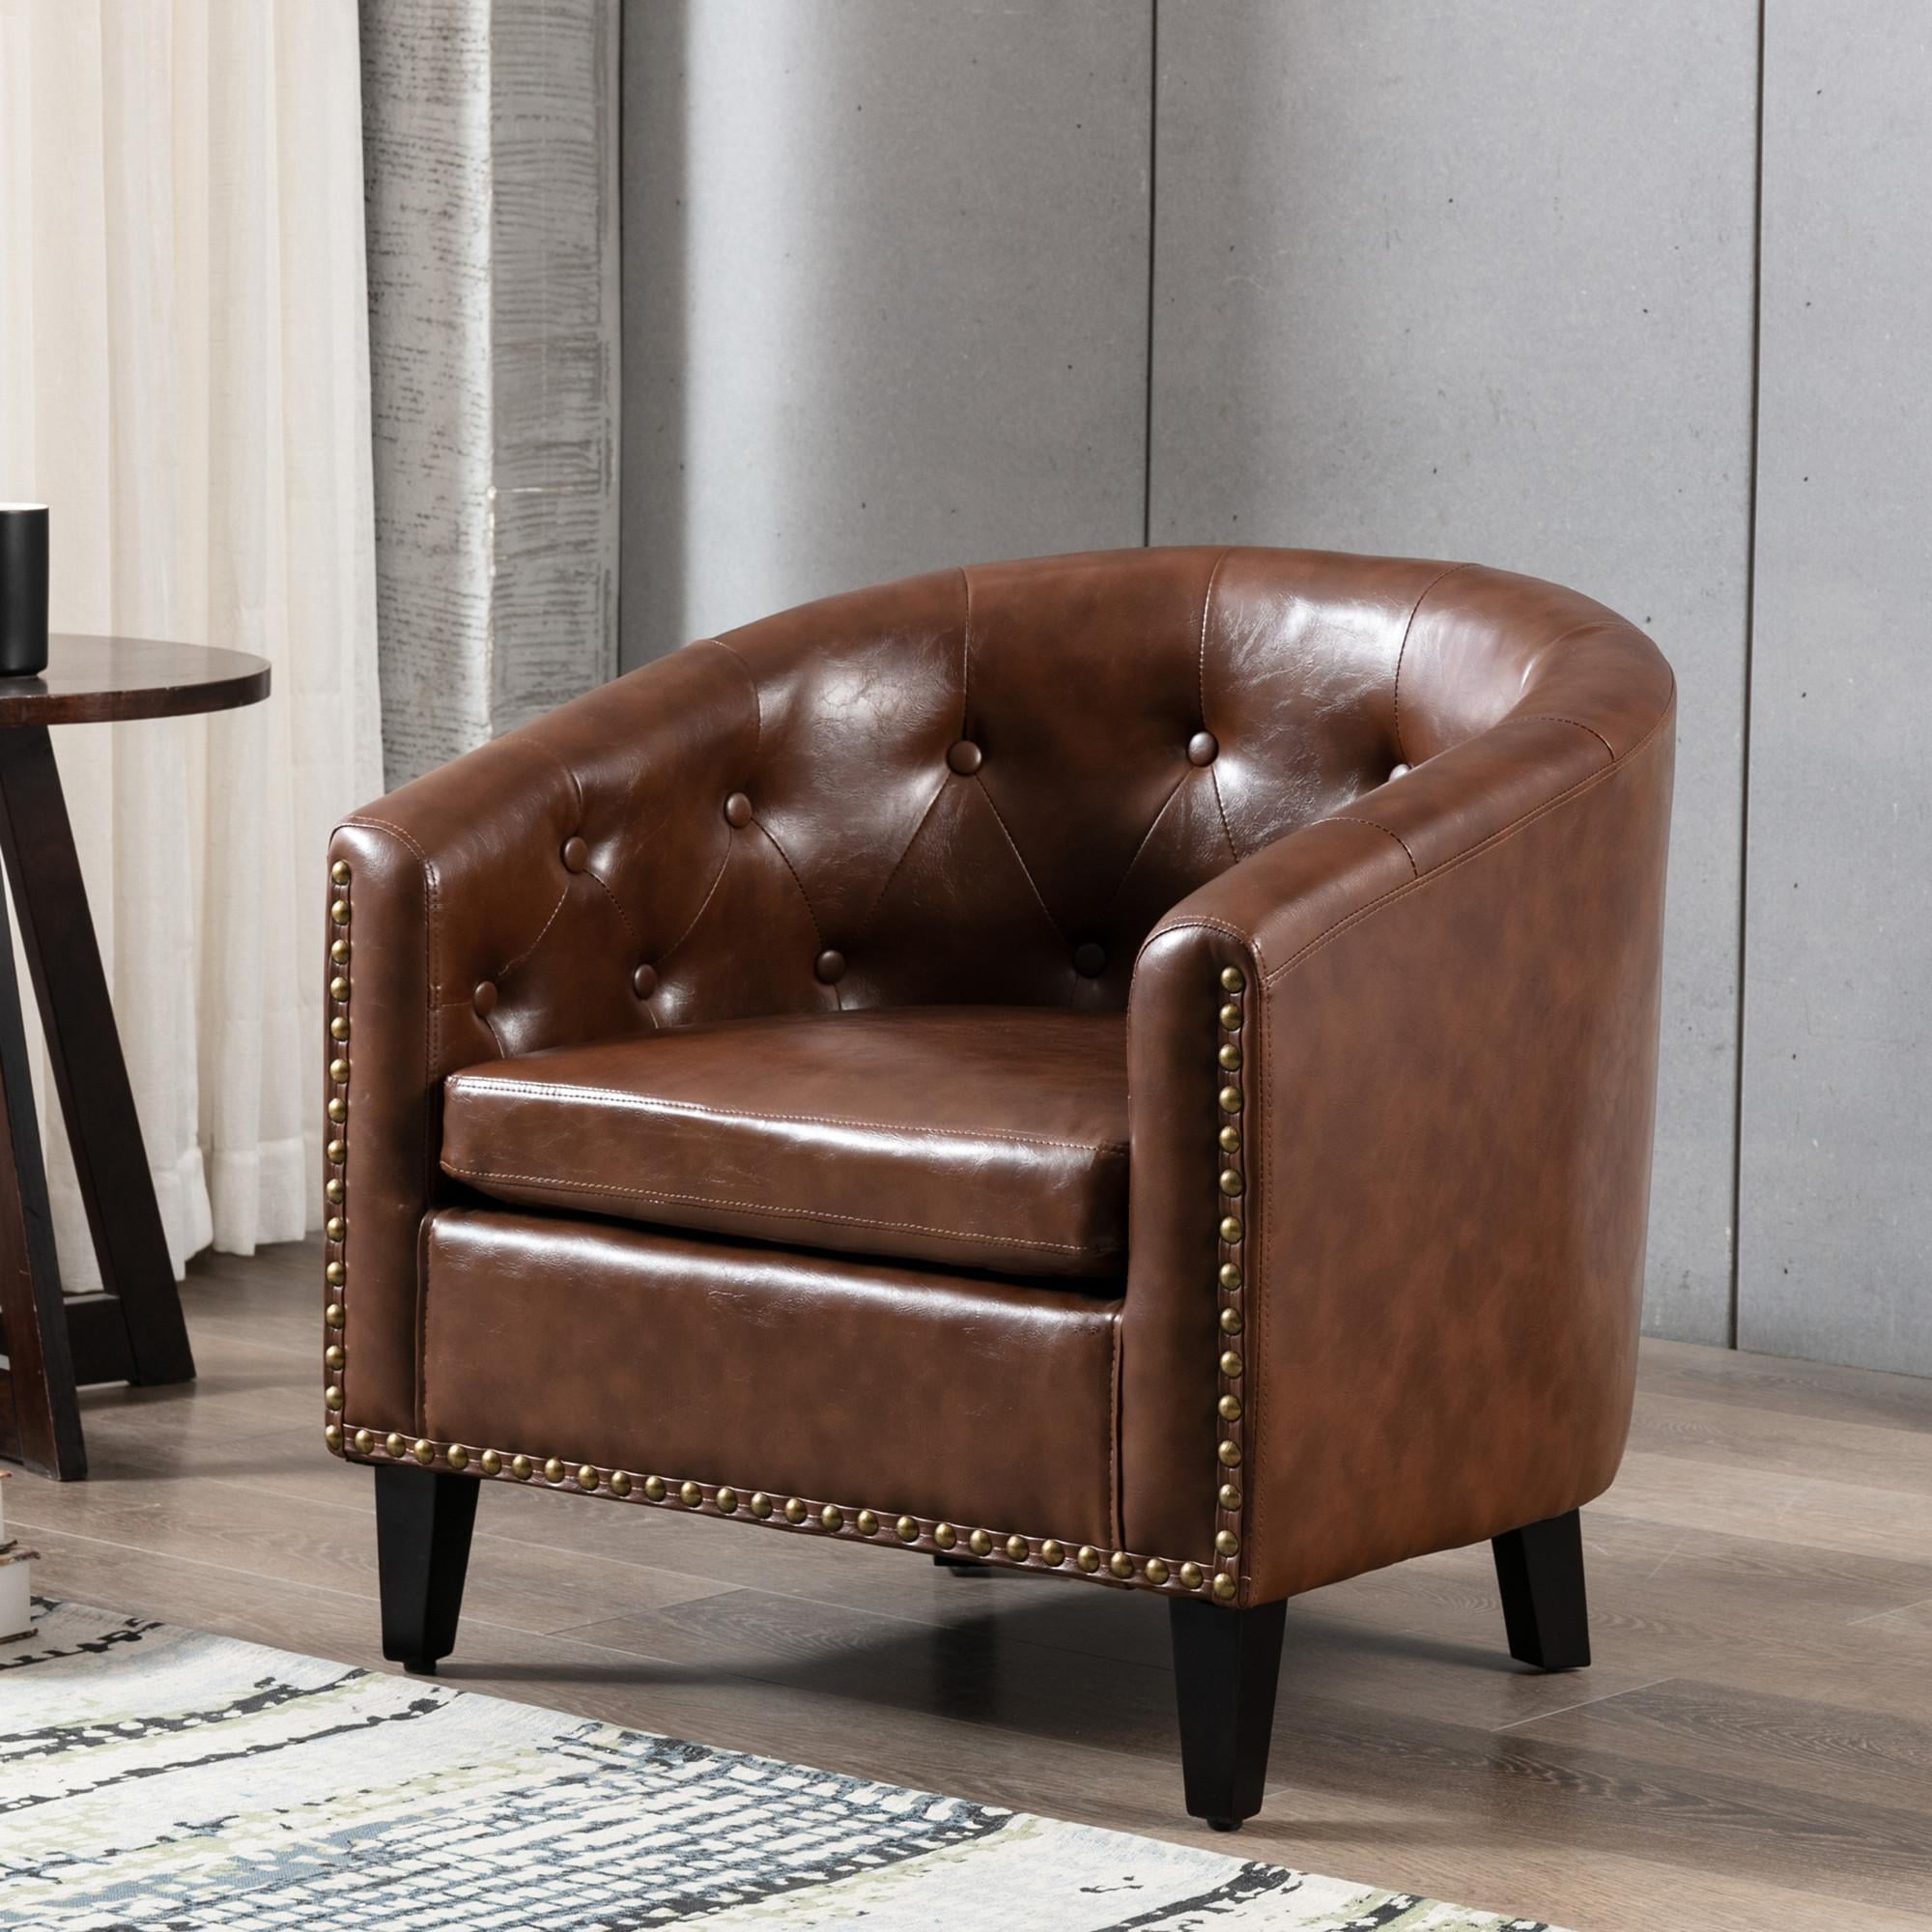 Leather Accent Chairs For Living Room : The Ultimate Accent Chair Round